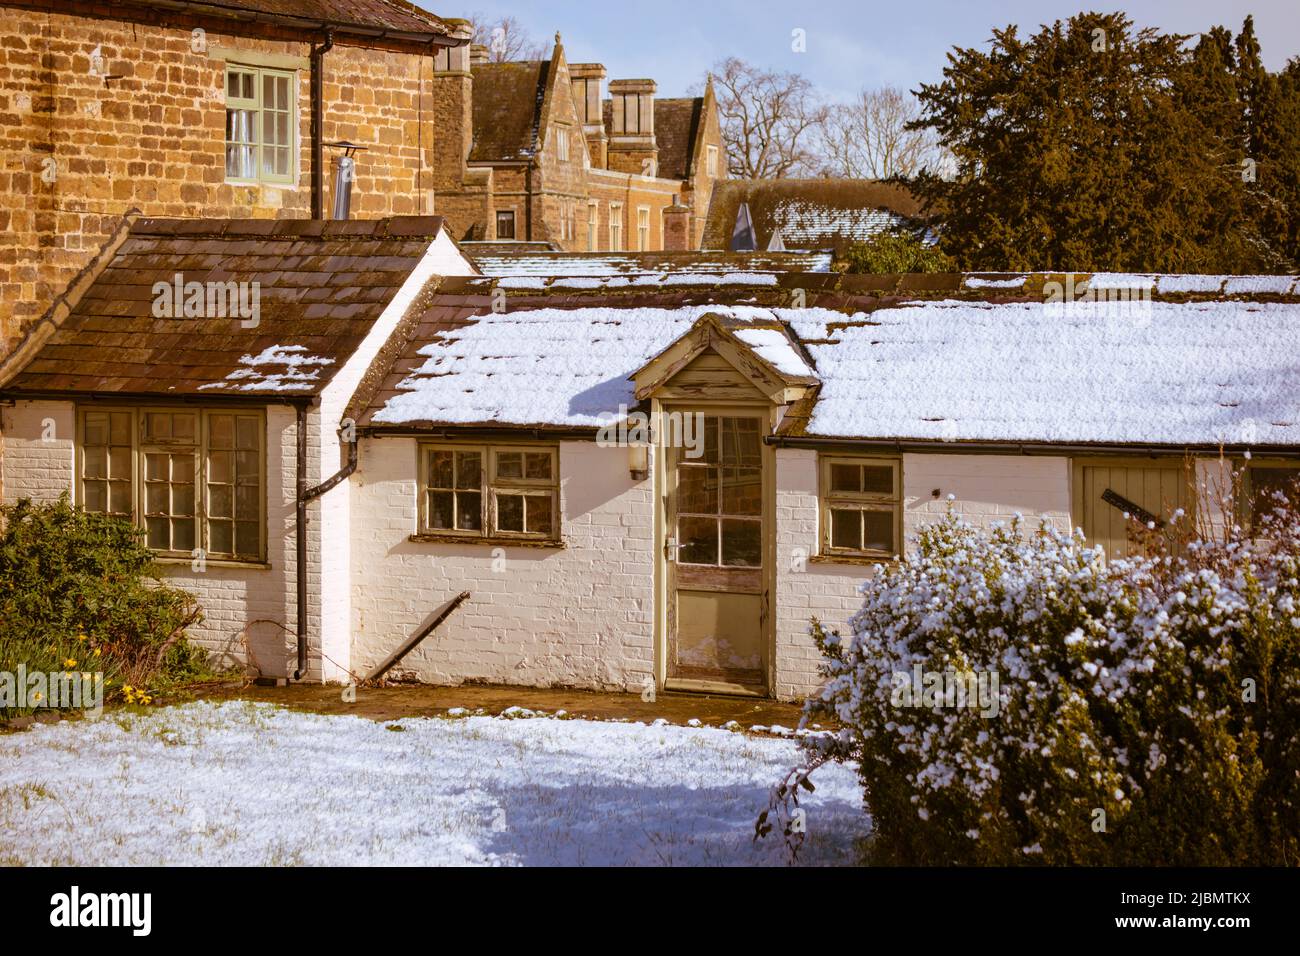 The Emmaus Chapel in the grounds of Launde Abbey in snow Stock Photo